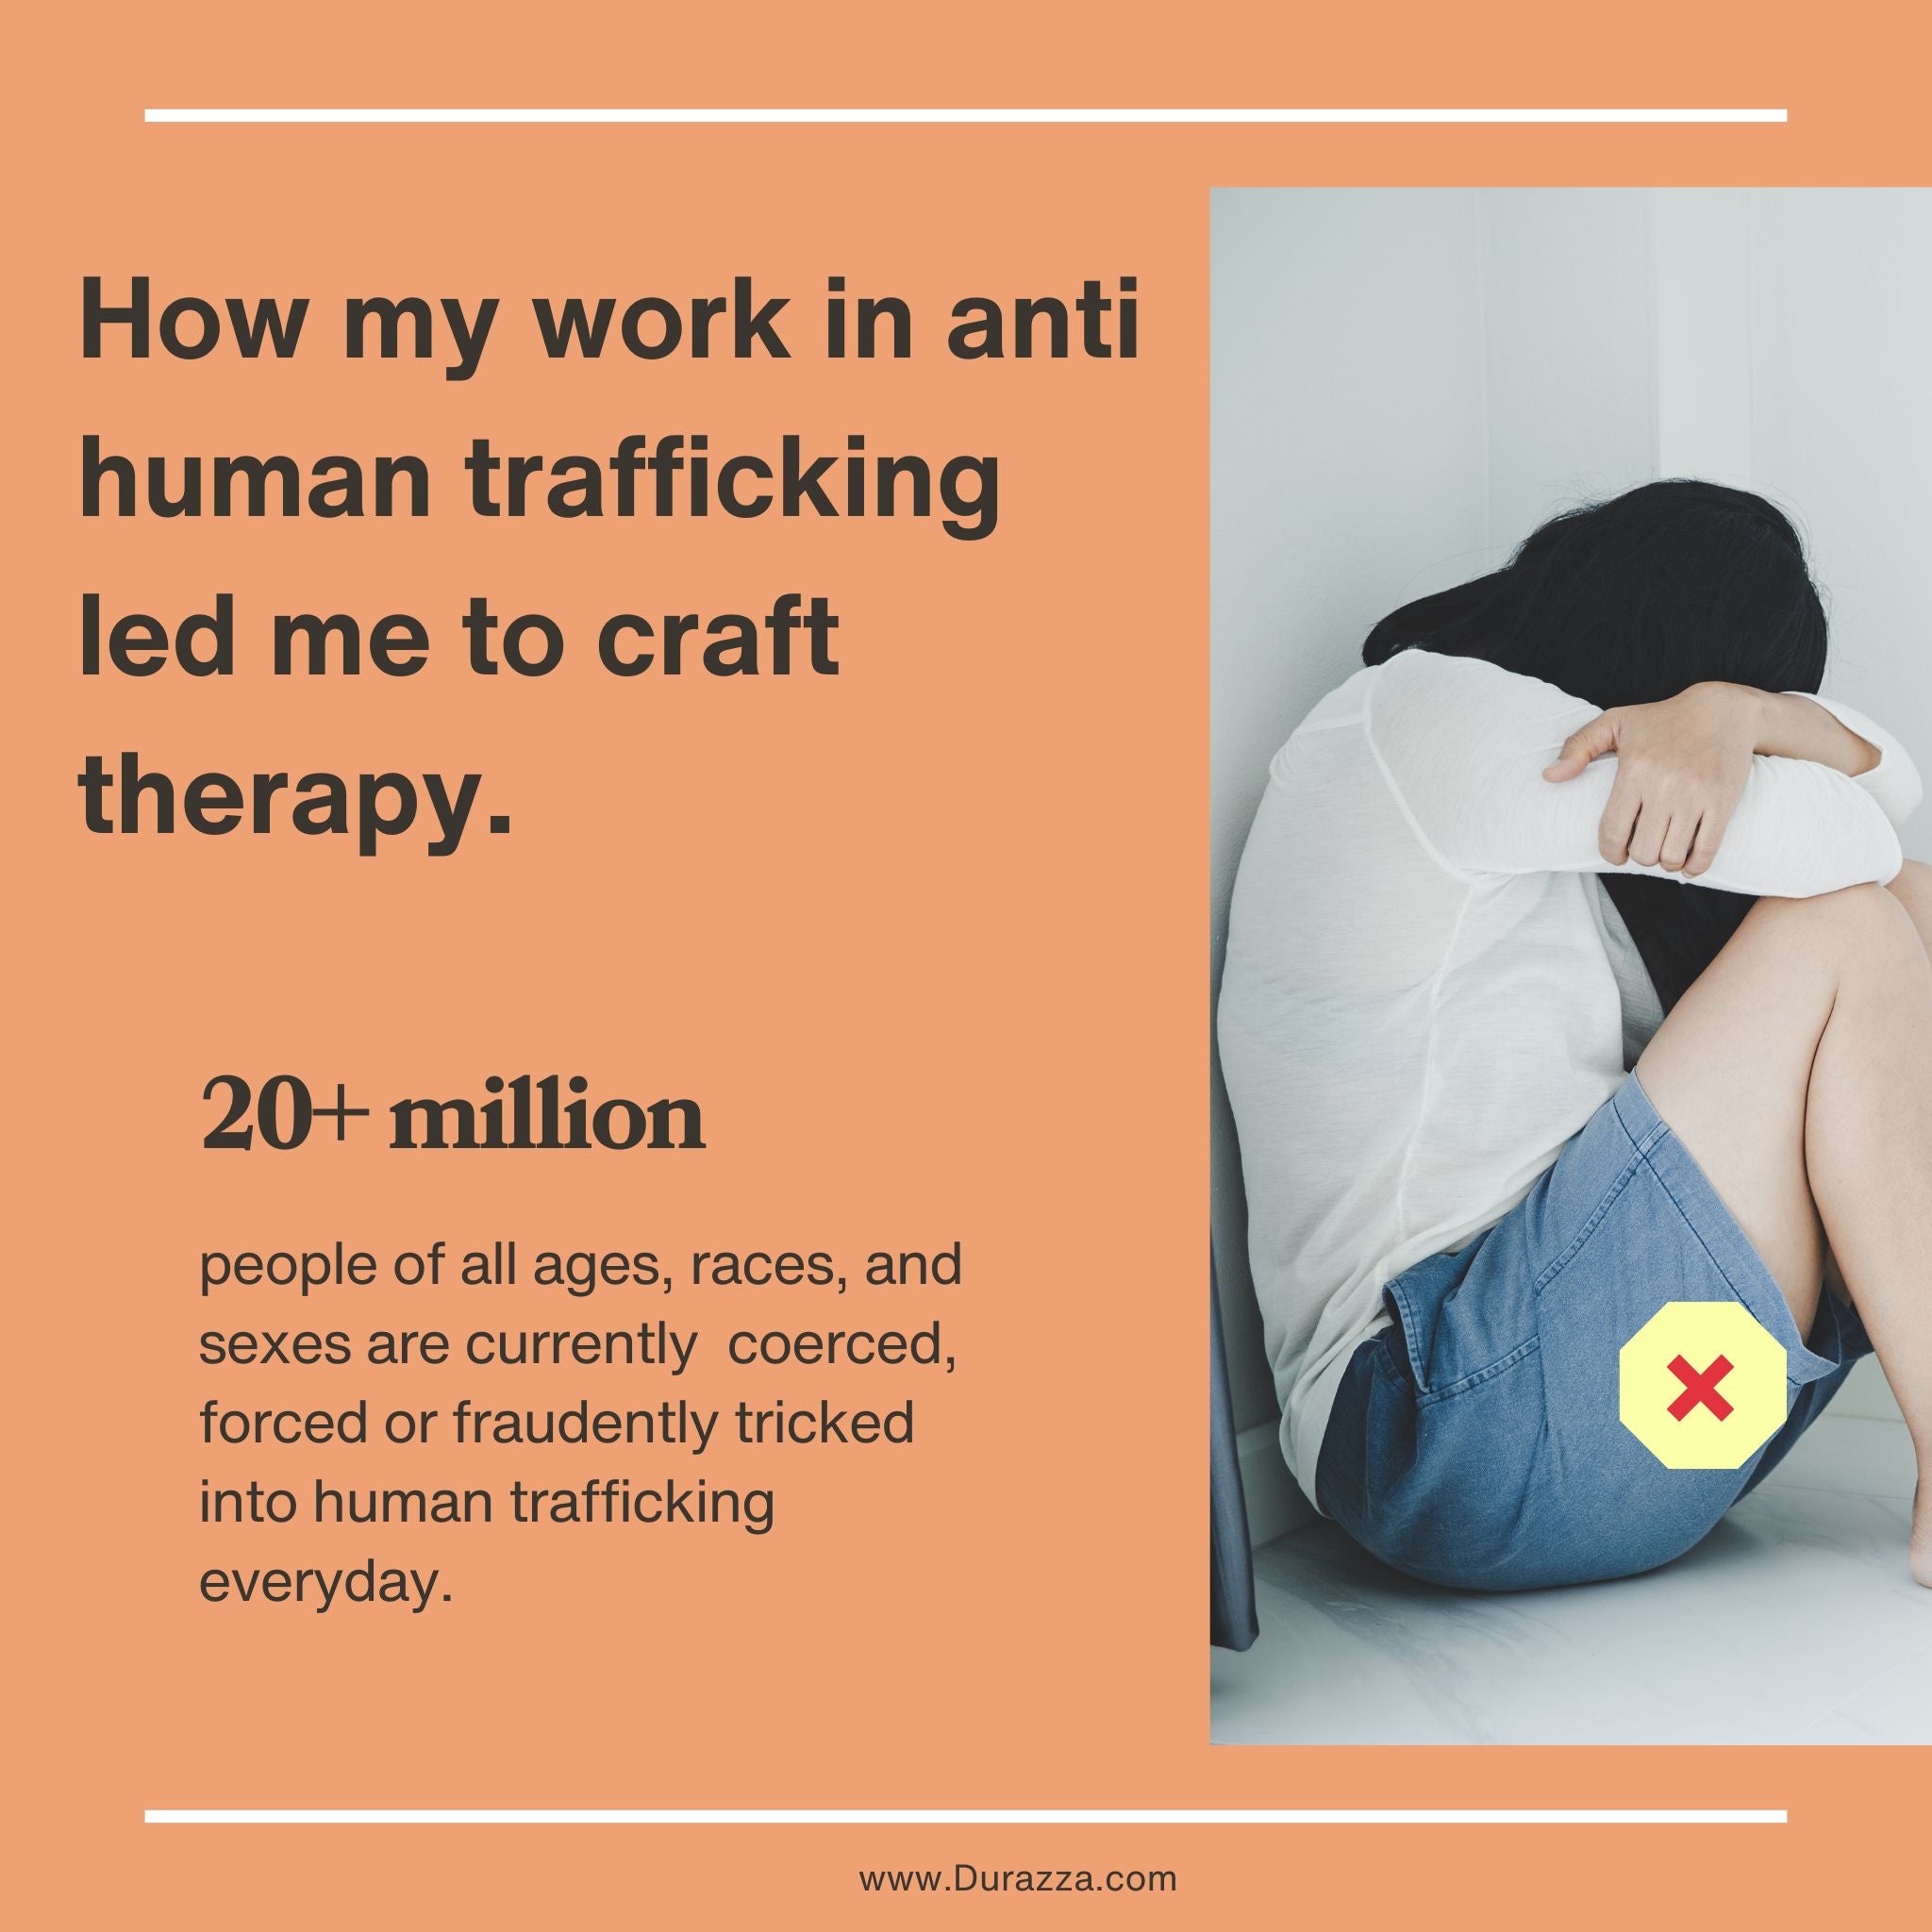 How my work in anti human trafficking led to crafting therapy for survivors